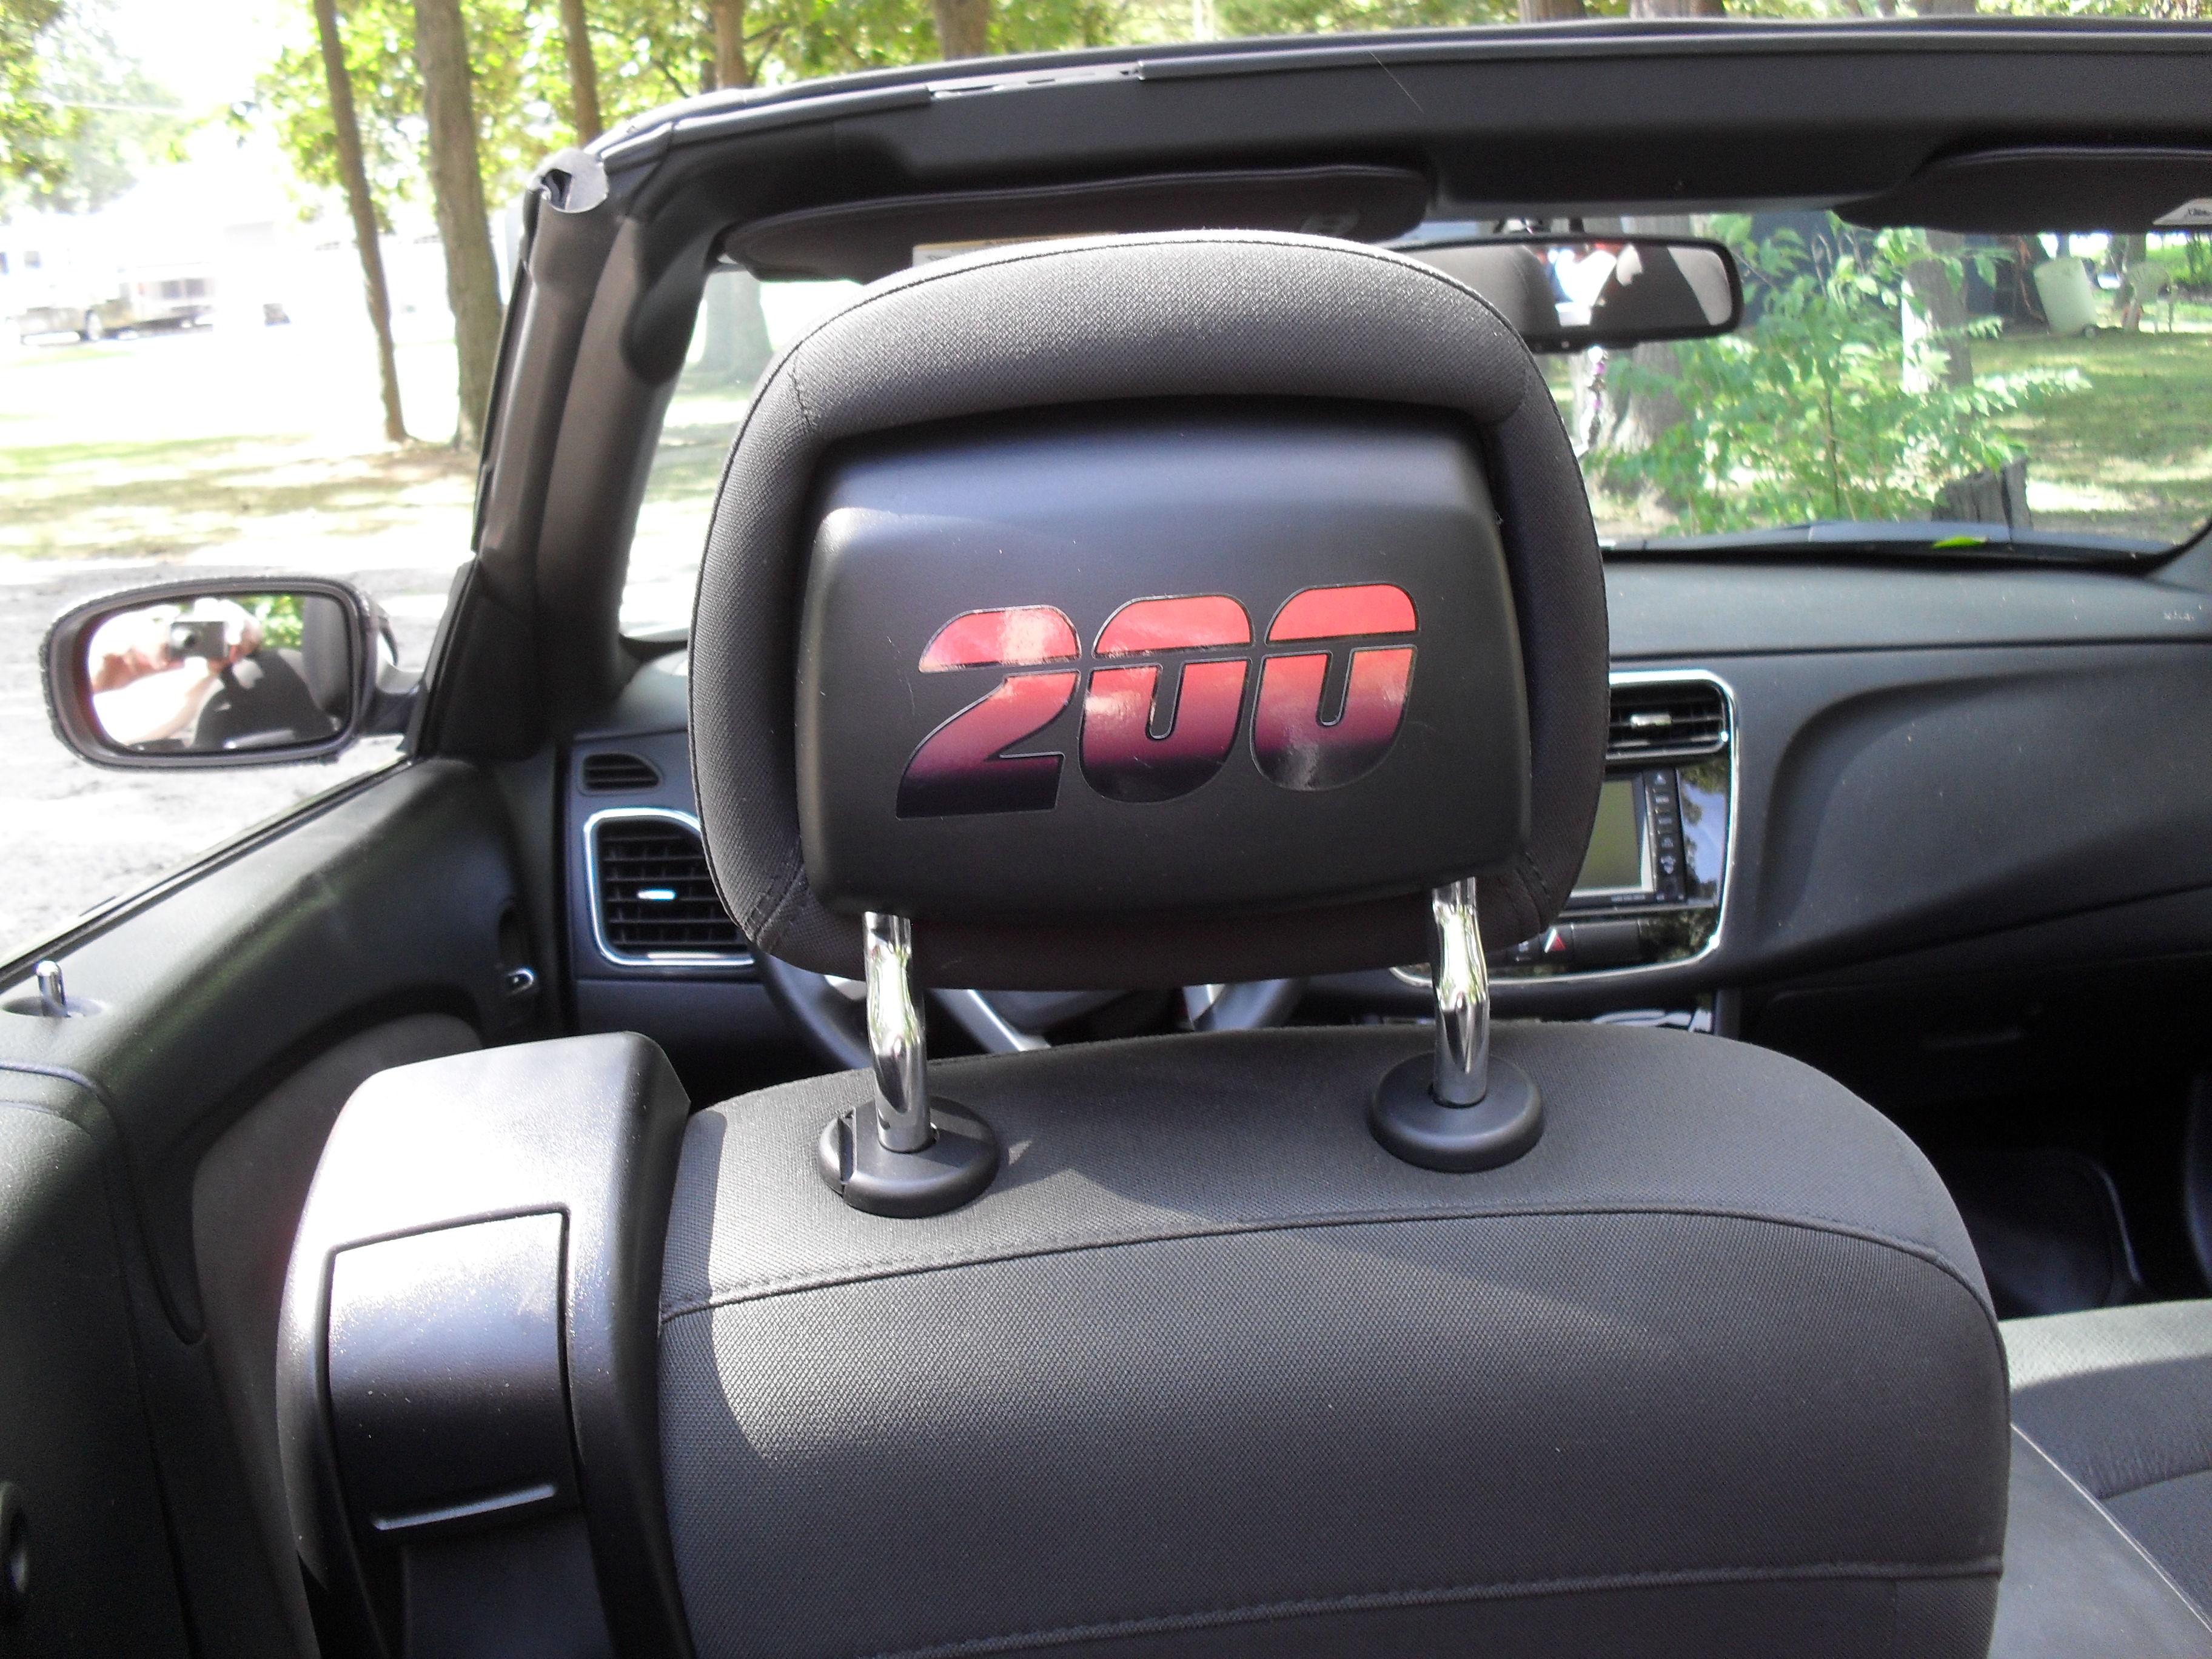 200 Decal